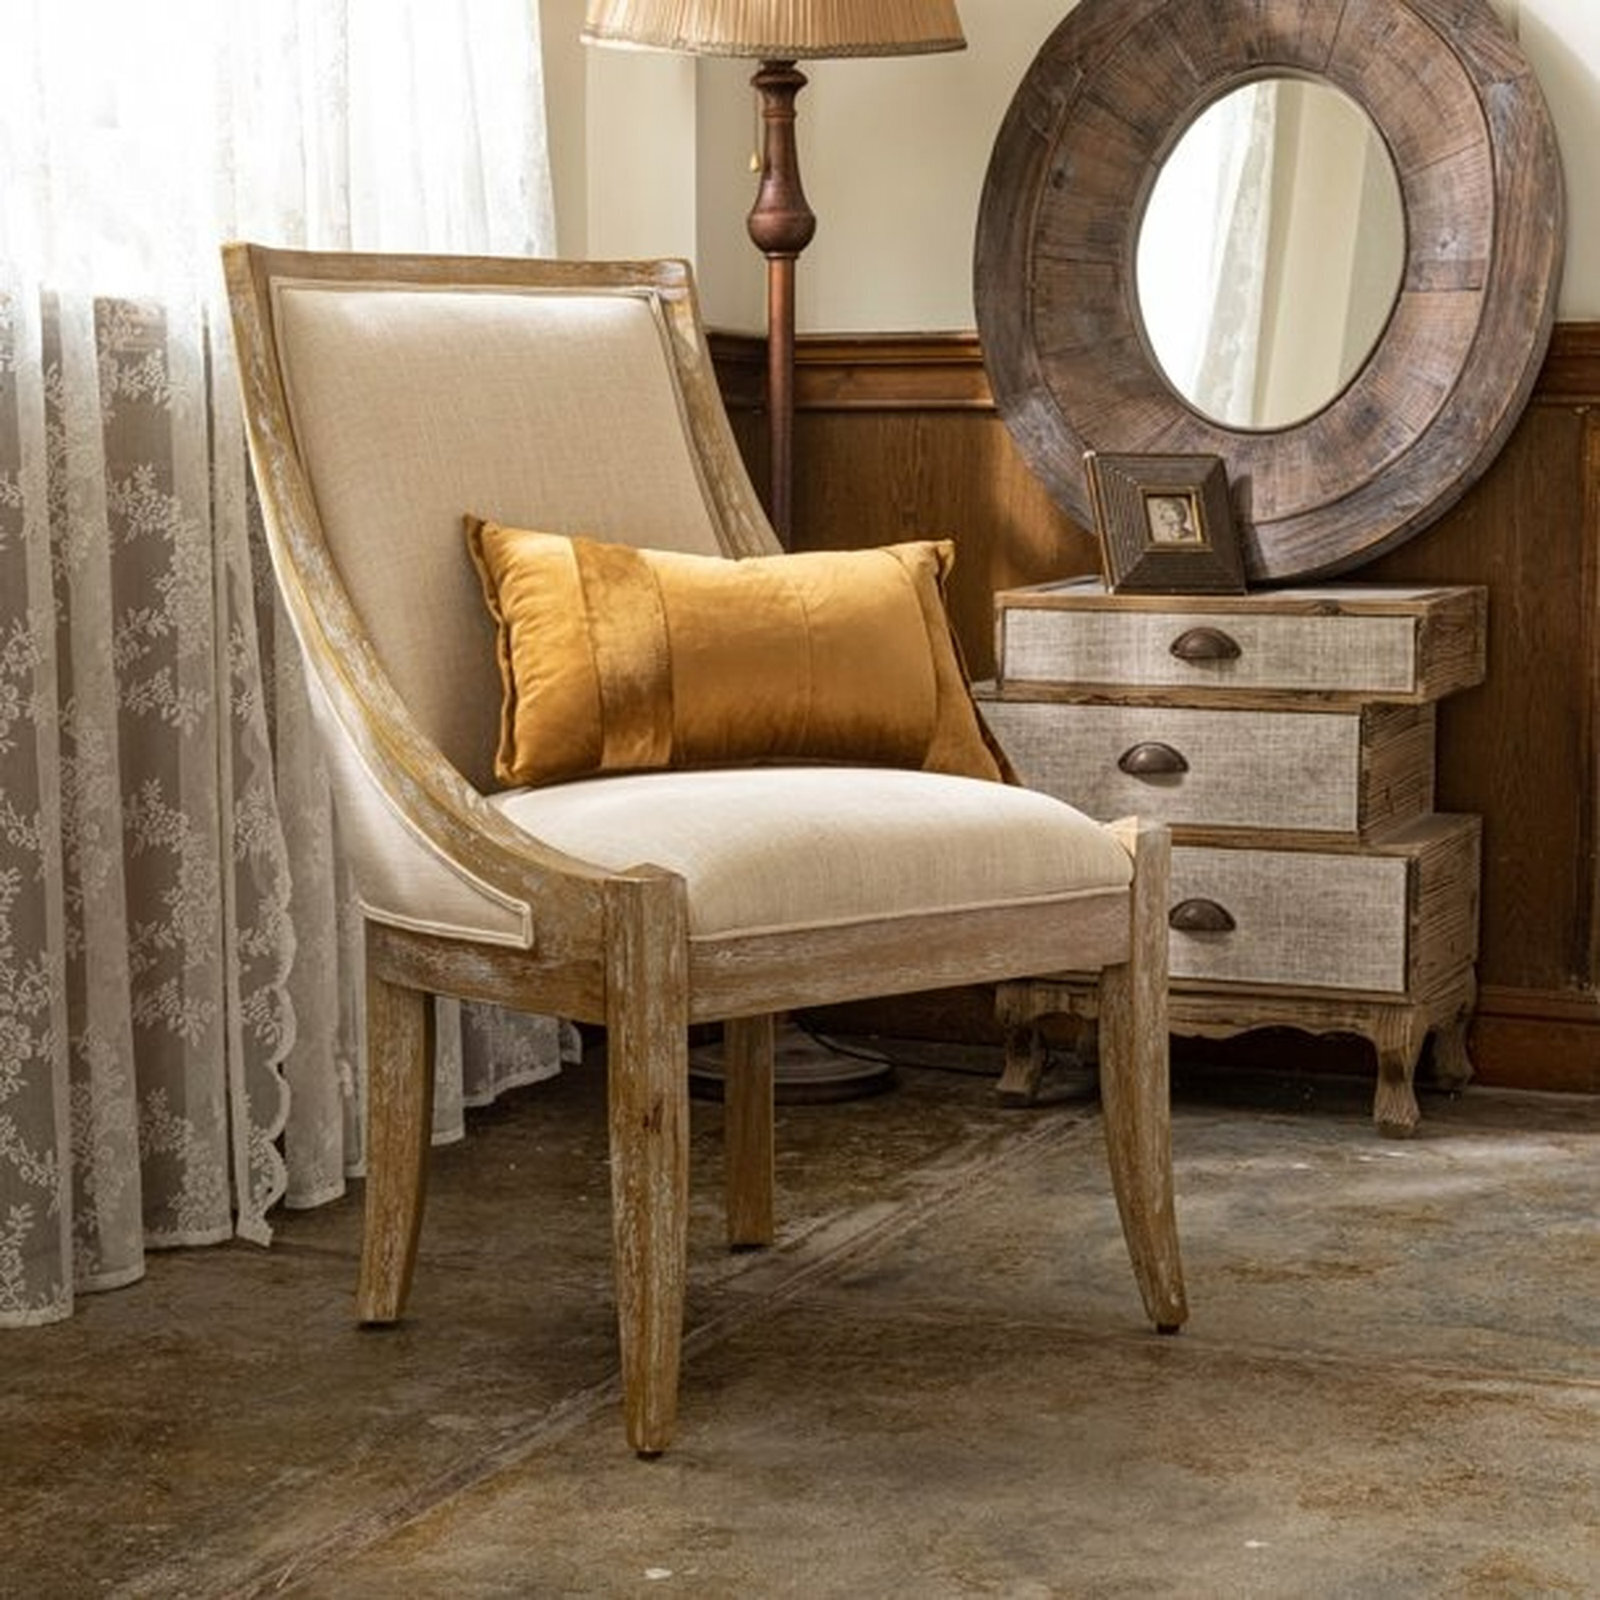 Rustic Country Inspired Shabby Chic Armchair